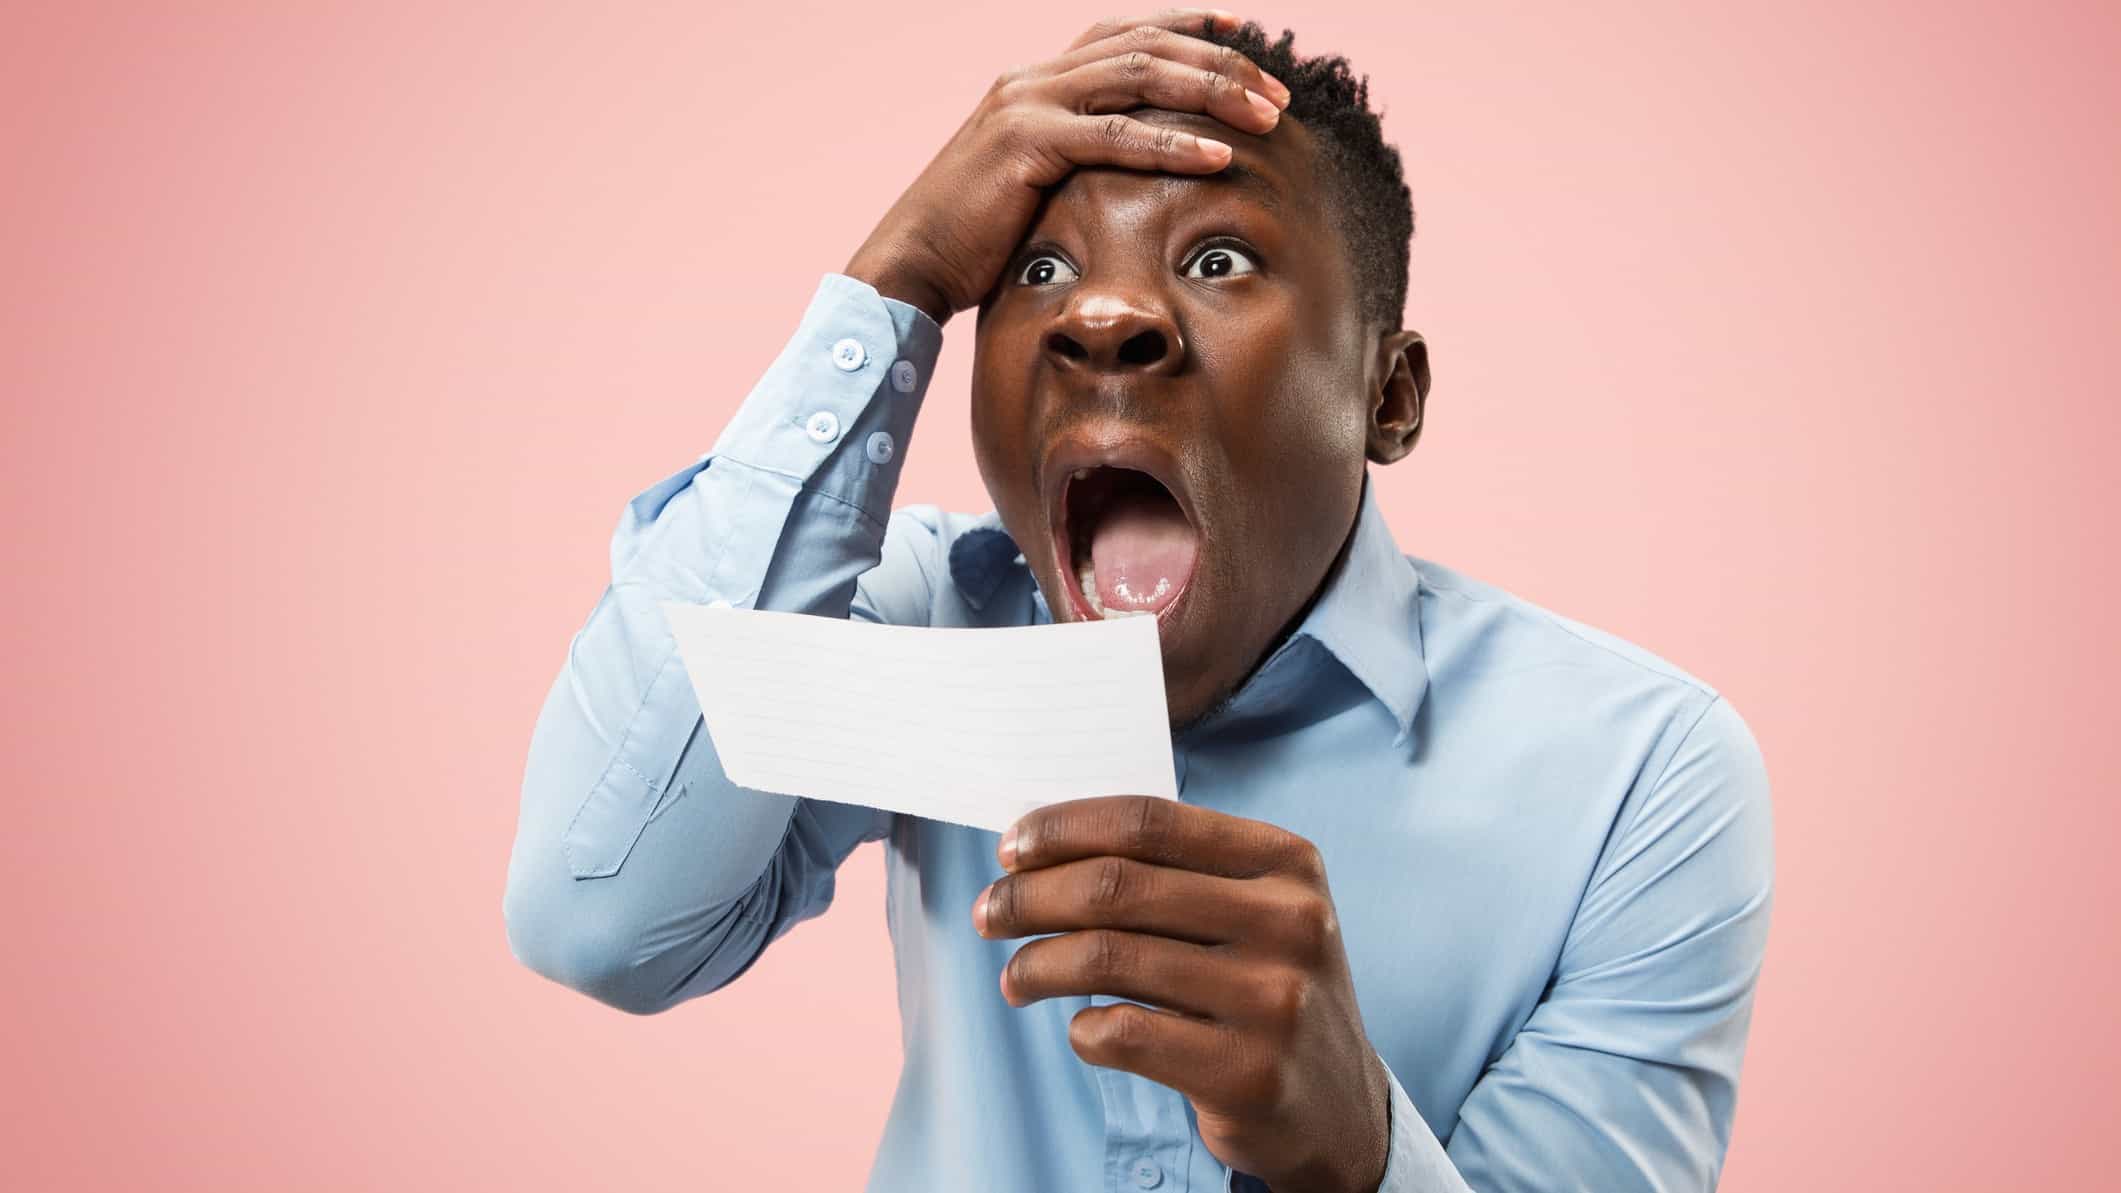 Man open mouthed looking shocked while holding betting slip